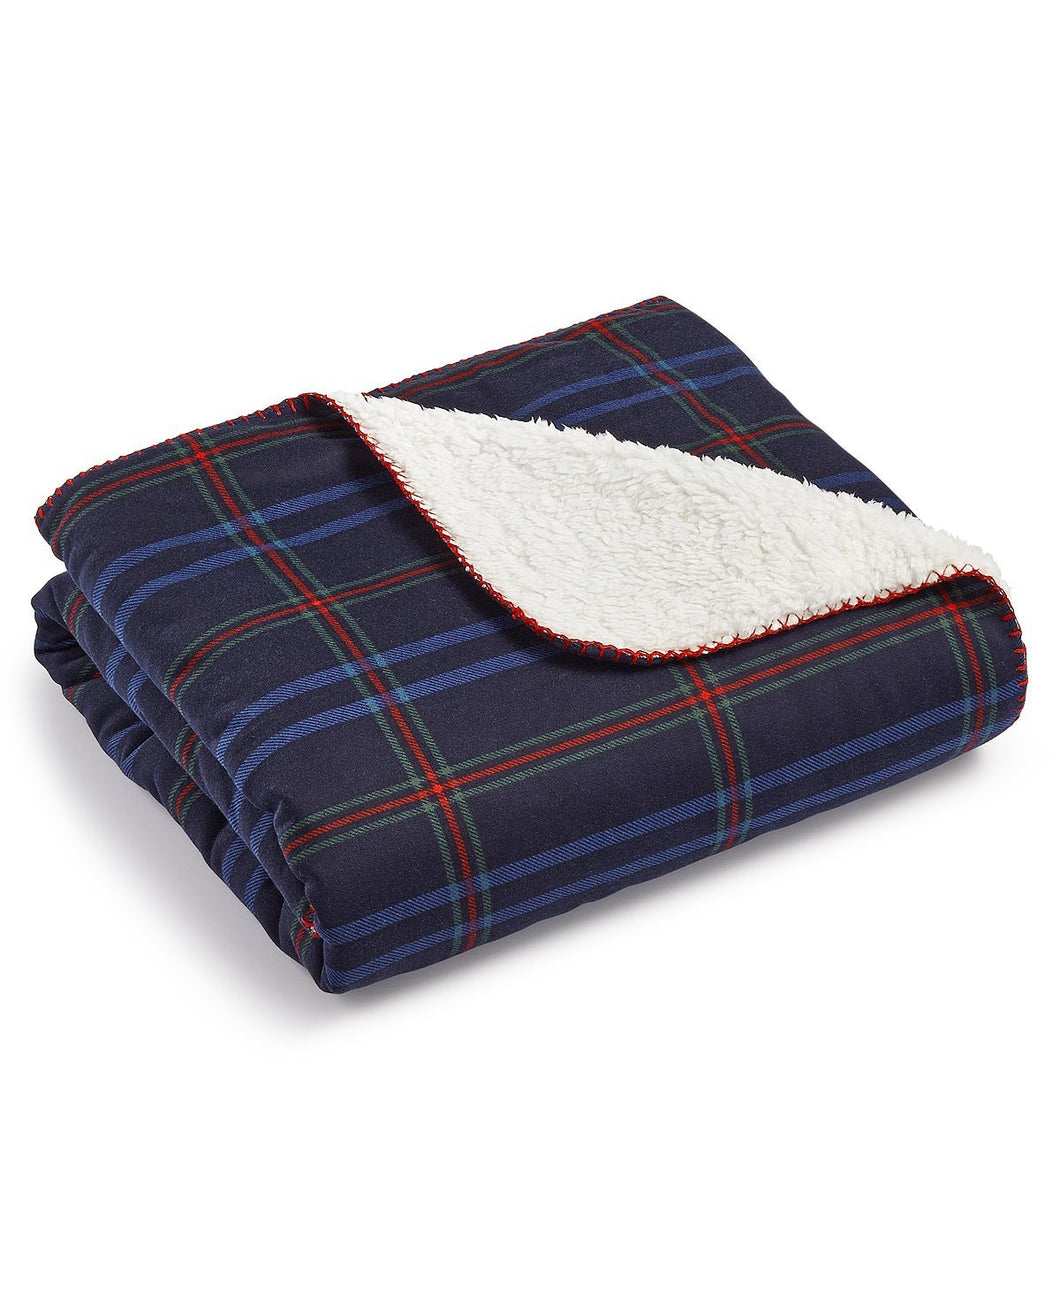 Martha Stewart Collection Reversible Faux-Sherpa Navy Plaid Throw